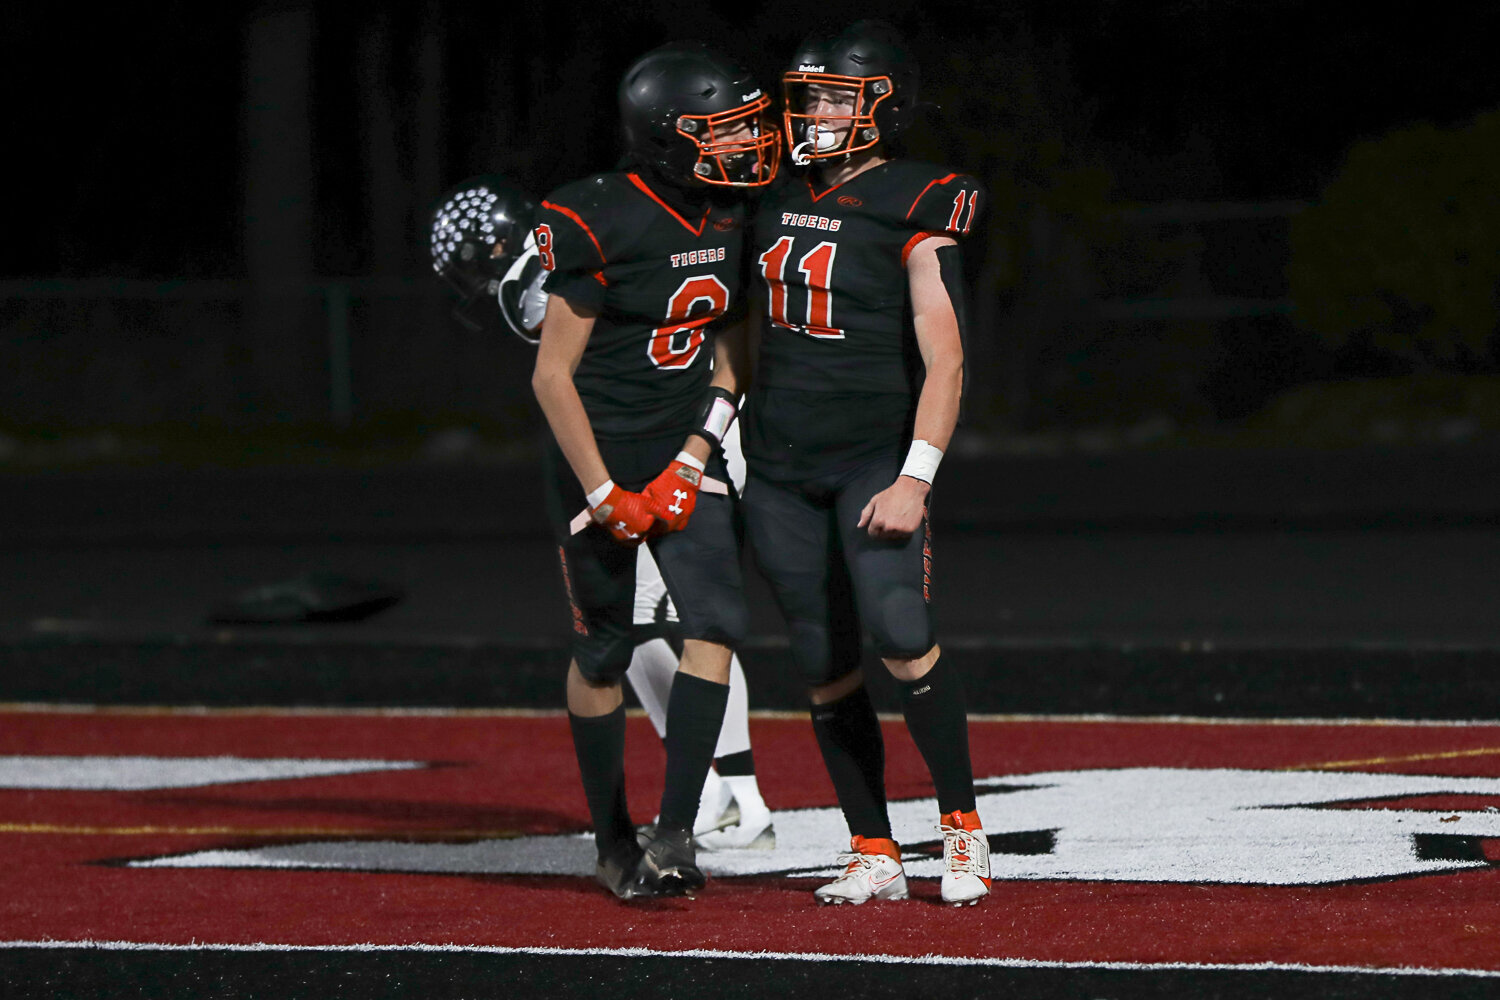 Colin Shields and James Grose celebrate a touchdown during a 43-14 Napavine win over River View on Nov. 18.